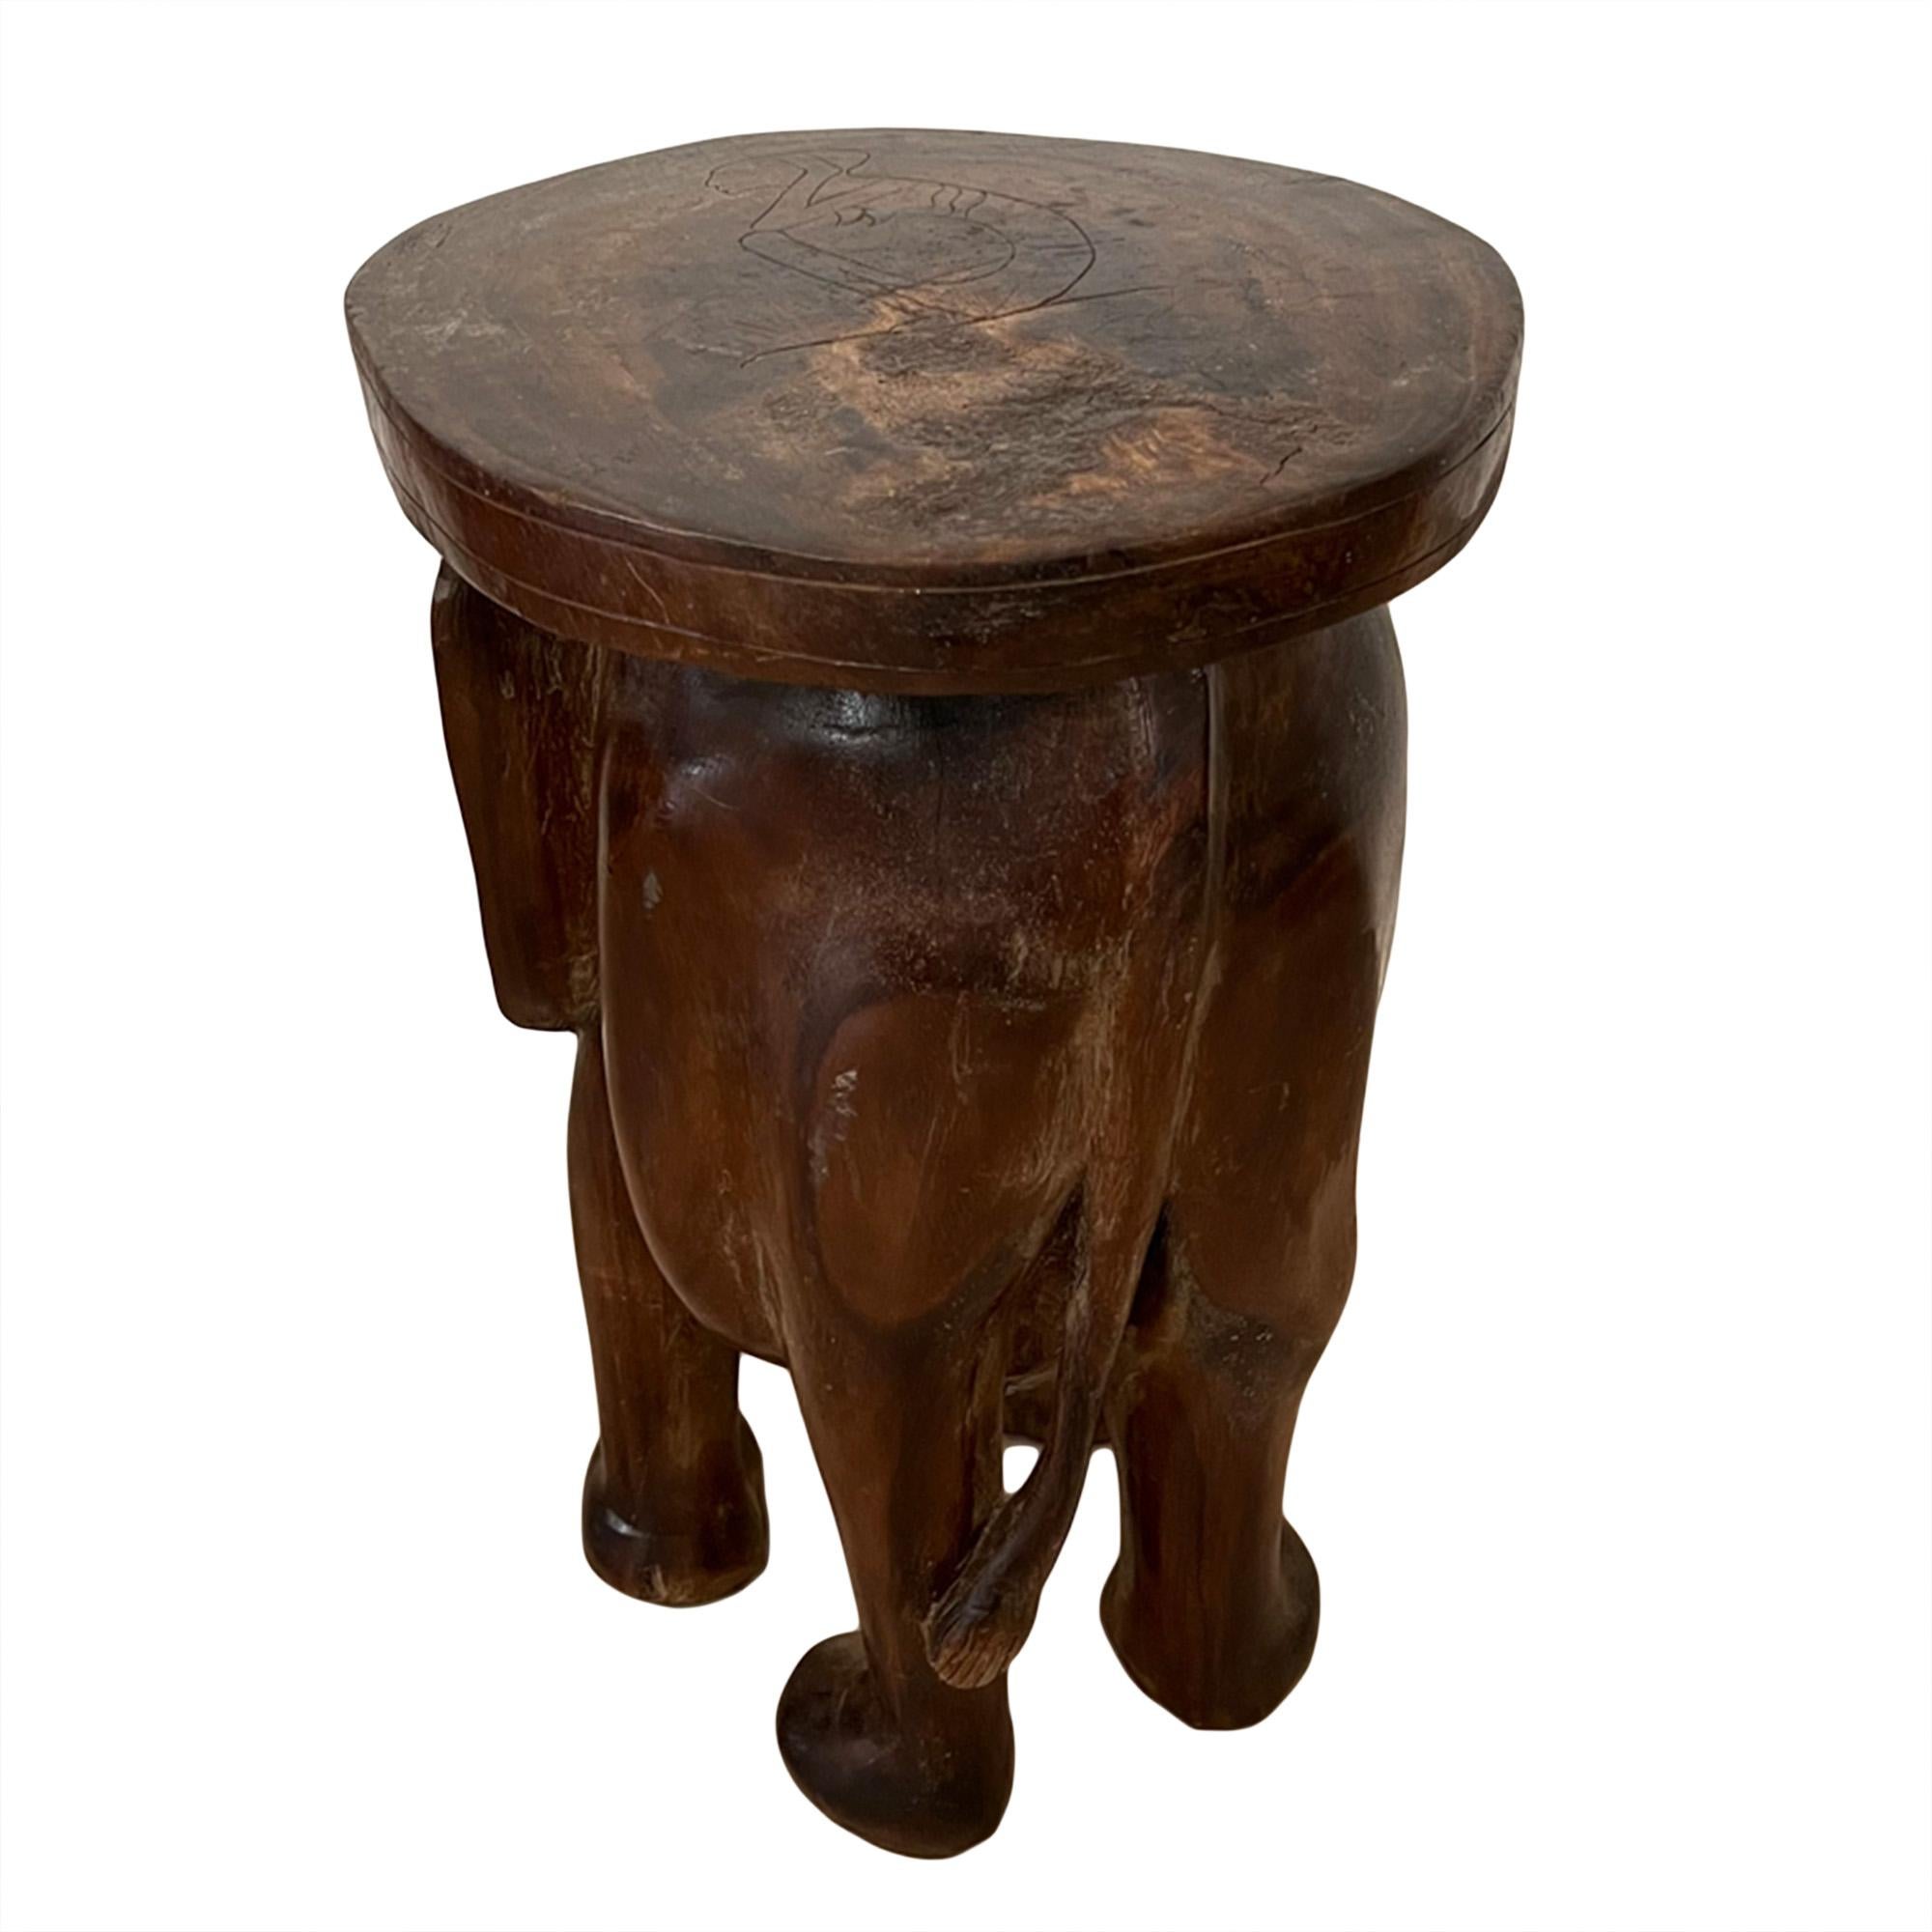 Anglo-Indian Large Carved Wood Elephant Table For Sale